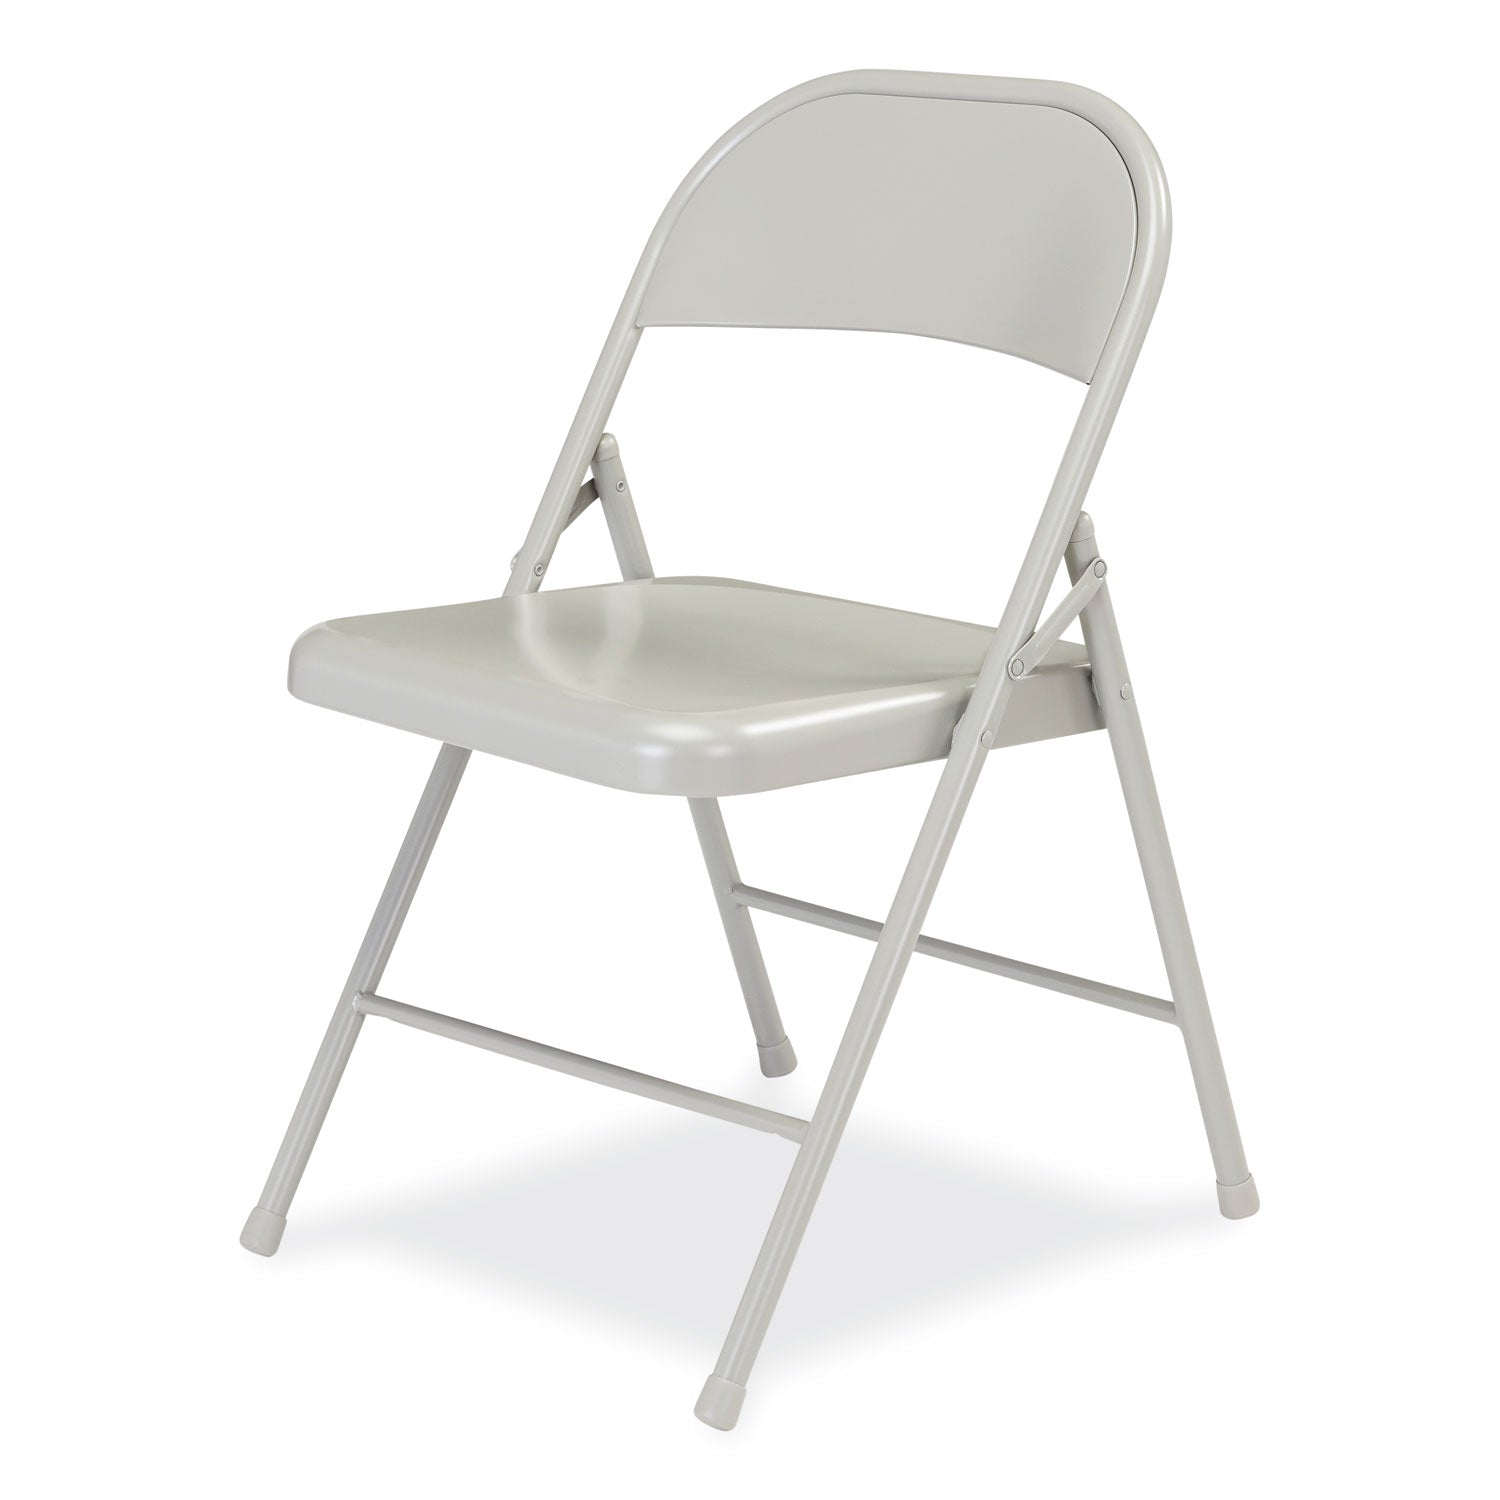 900-series-all-steel-folding-chair-supports-250-lb-1775-seat-height-gray-seat-back-base-4-ctships-in-1-3-business-days_nps902 - 3